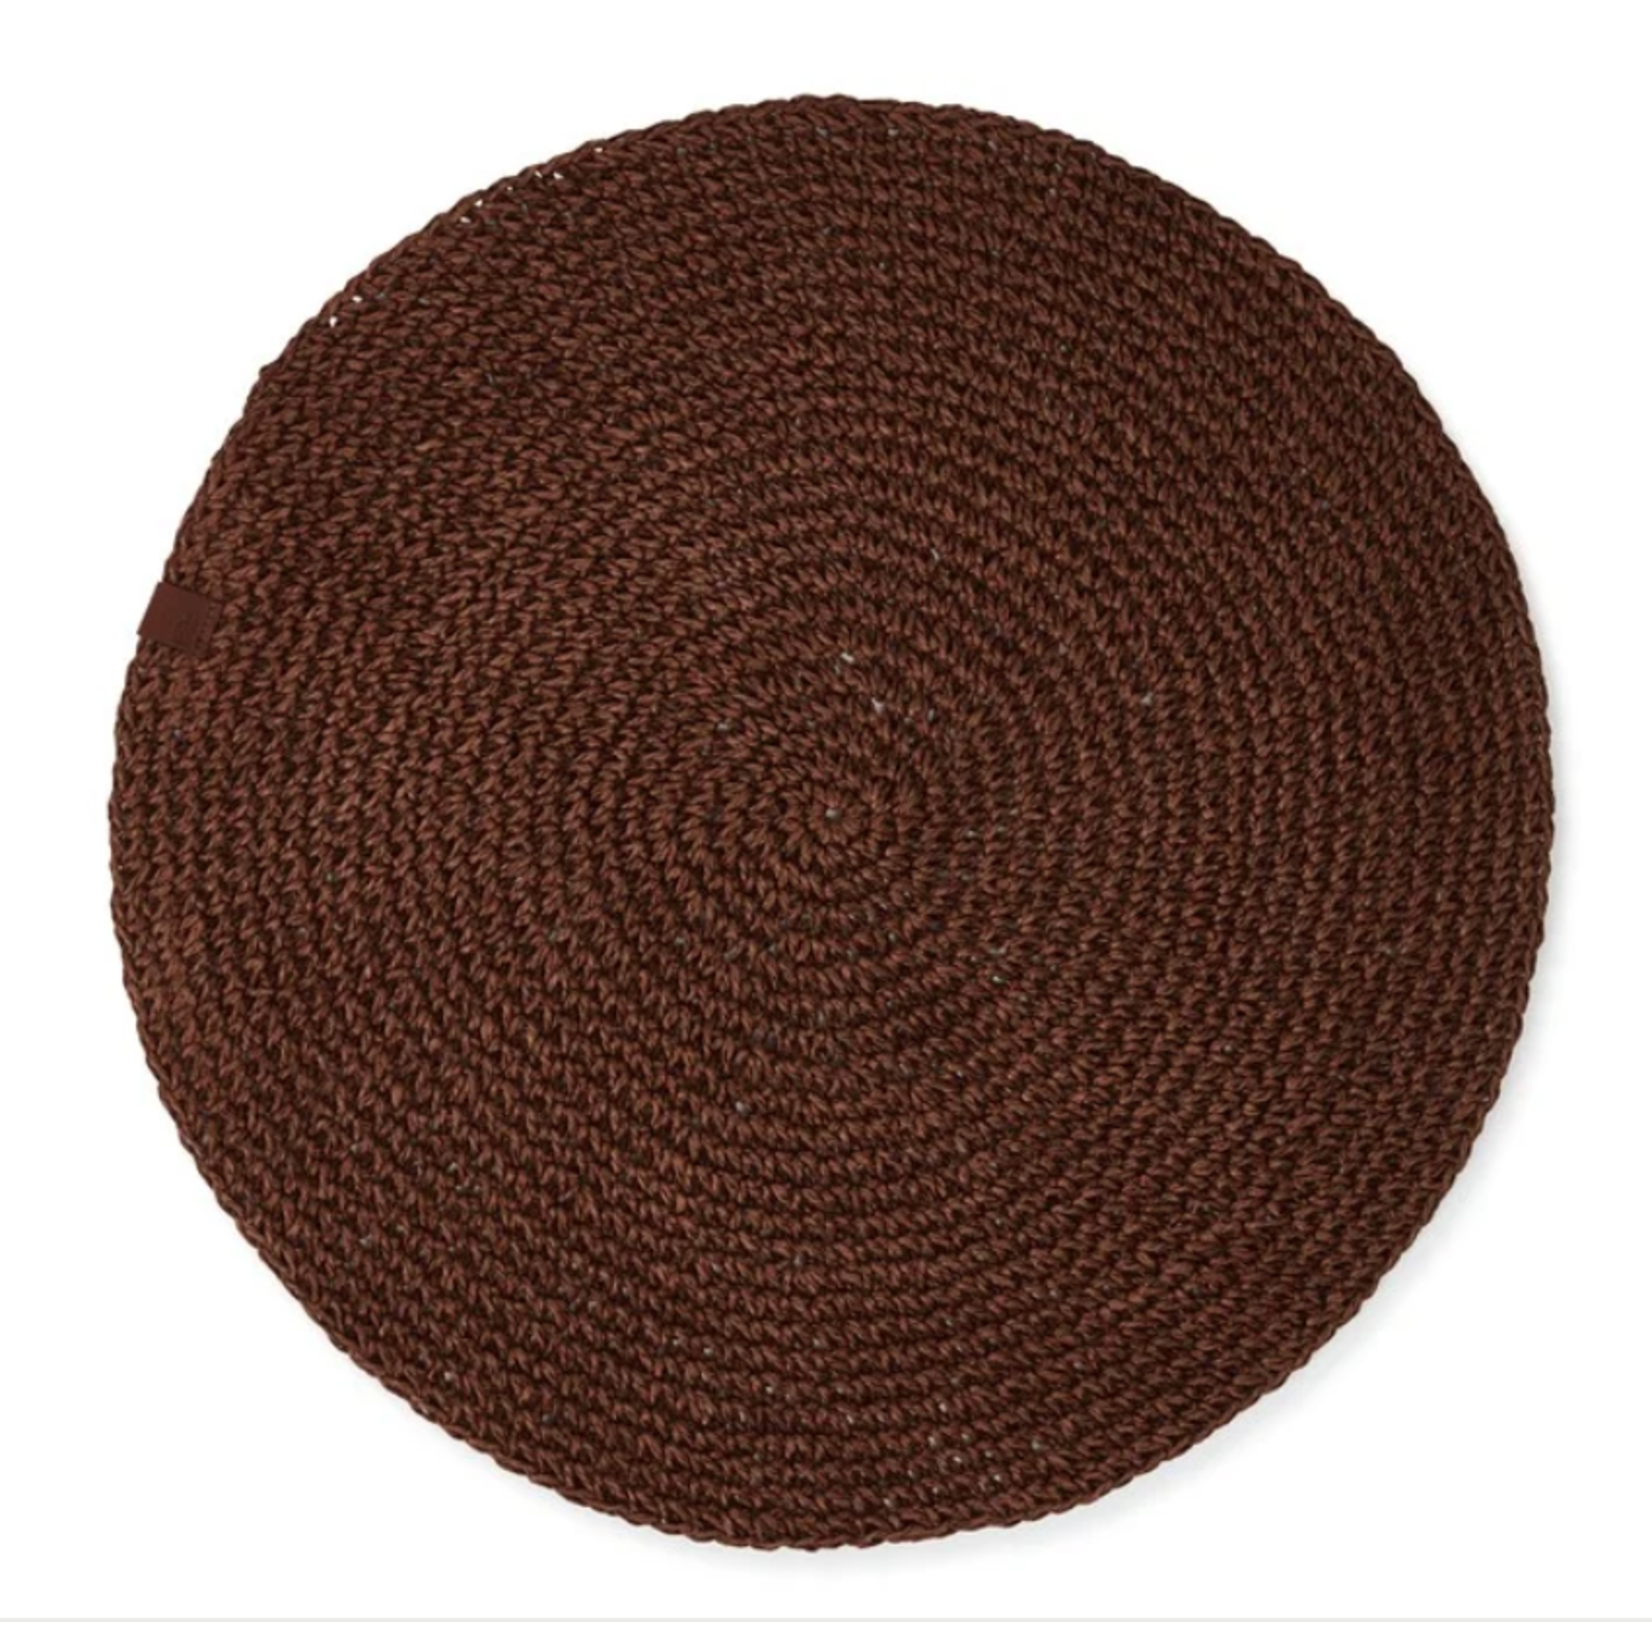 Round Recycled Paper Straw Placemat 38cm, Brown